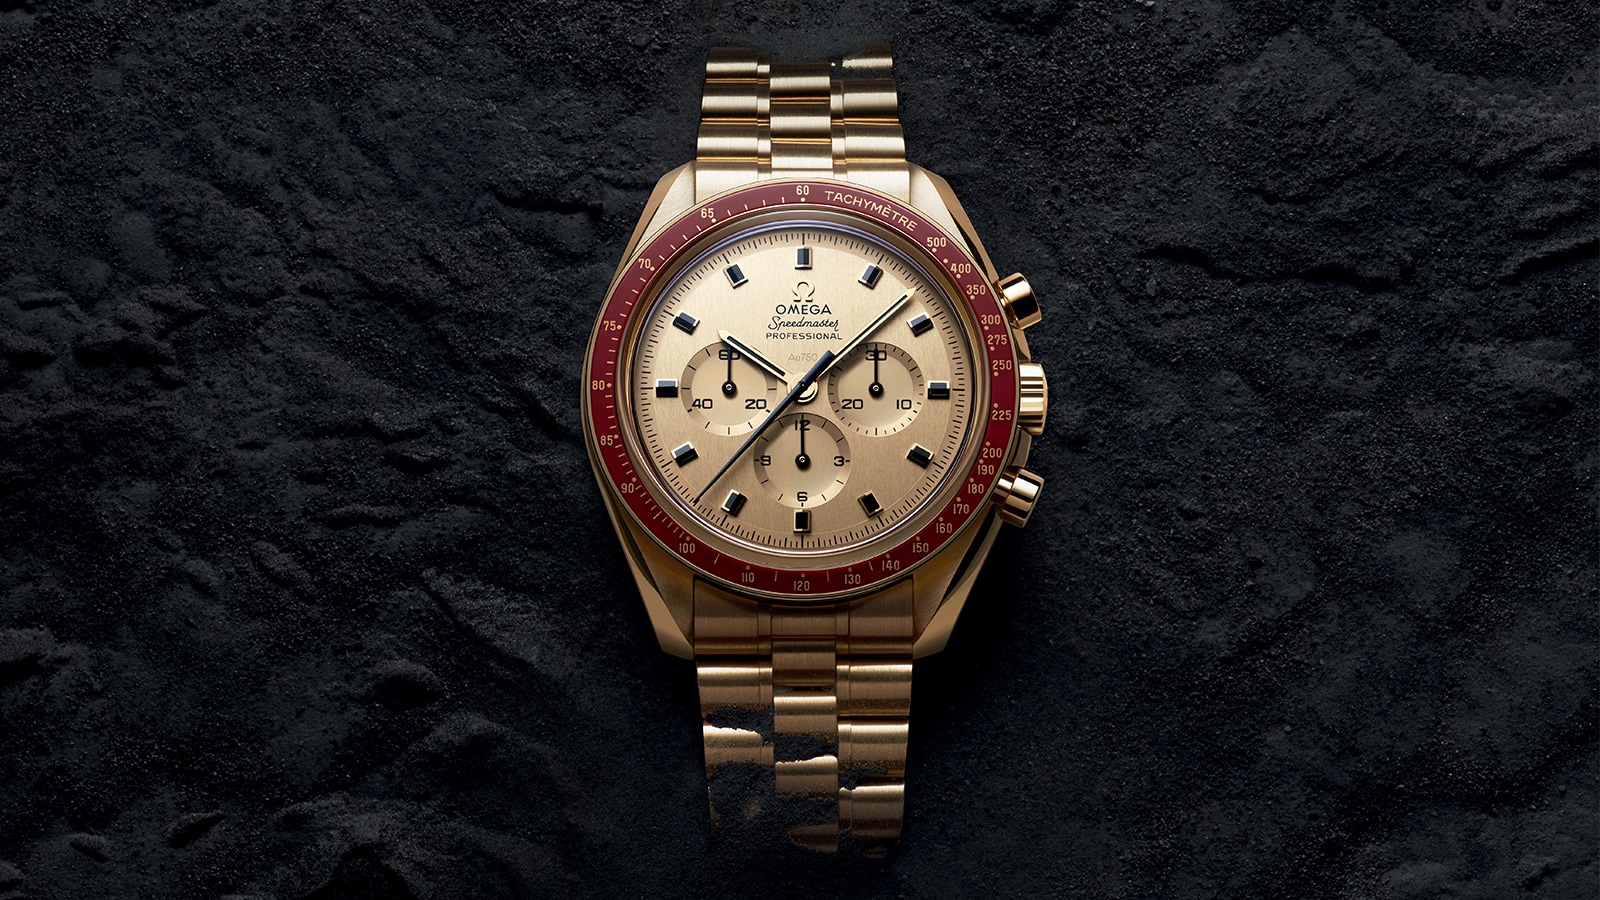 How To Tell If A Rolex Is Real Or Fake